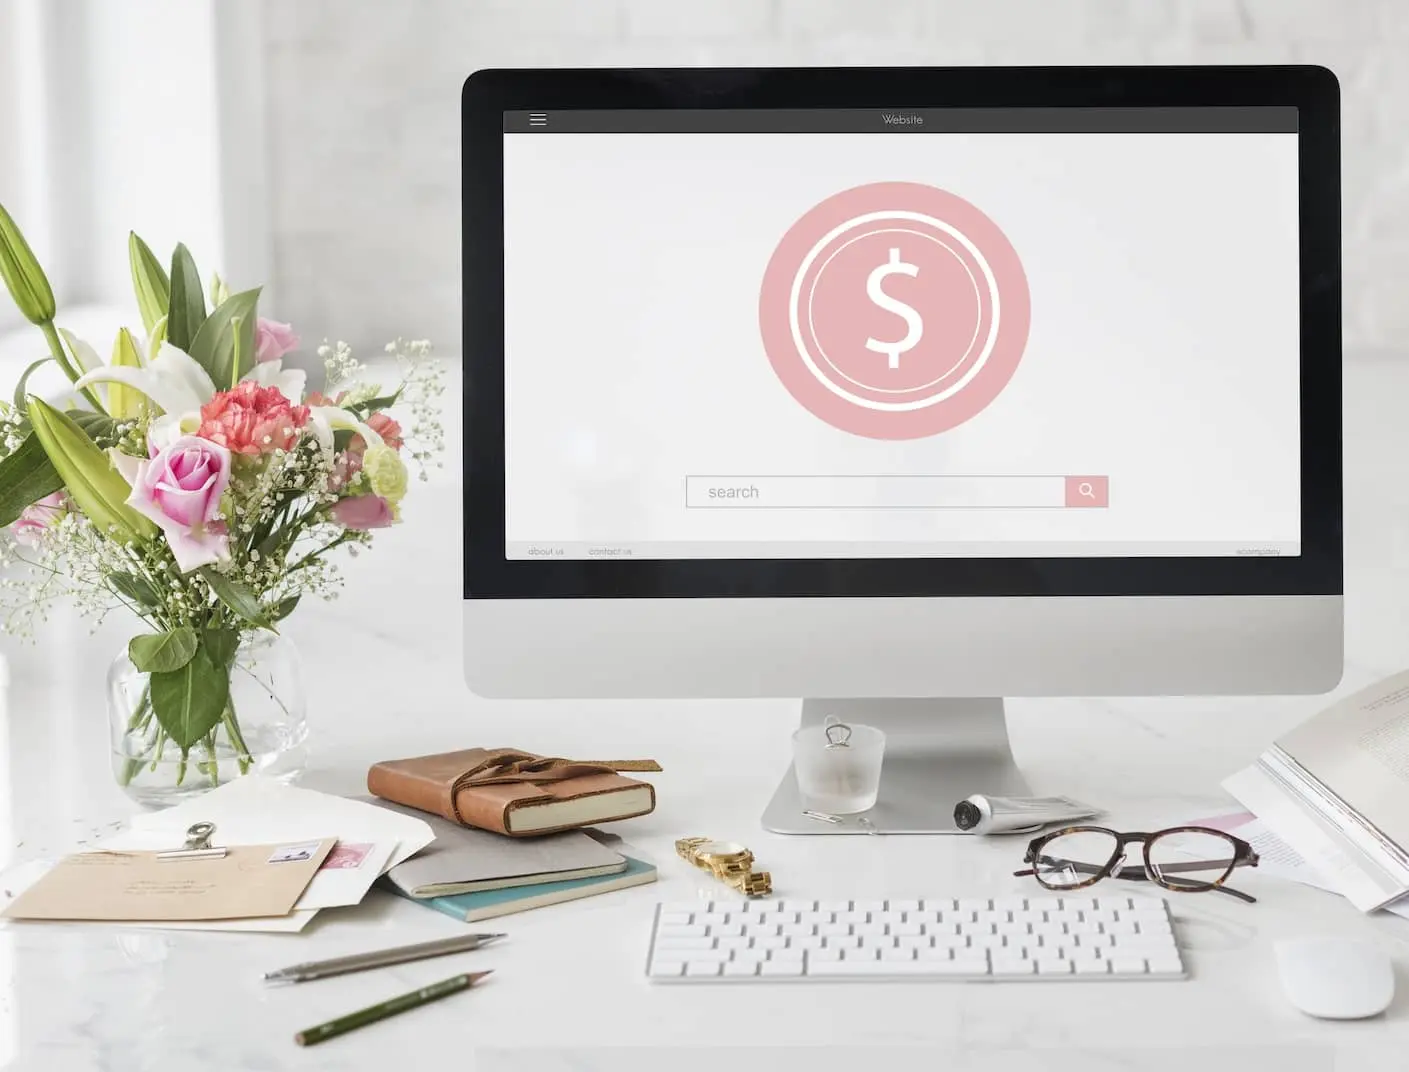 A modern and tidy workspace with a large desktop monitor displaying a website's homepage, prominently featuring a pink dollar sign icon in the center to denote pricing. The desk is adorned with a bouquet of fresh flowers, a closed notebook tied with a strap, personal stationery, a pair of glasses, and a cup, suggesting a blend of professional web design work and personal touch.